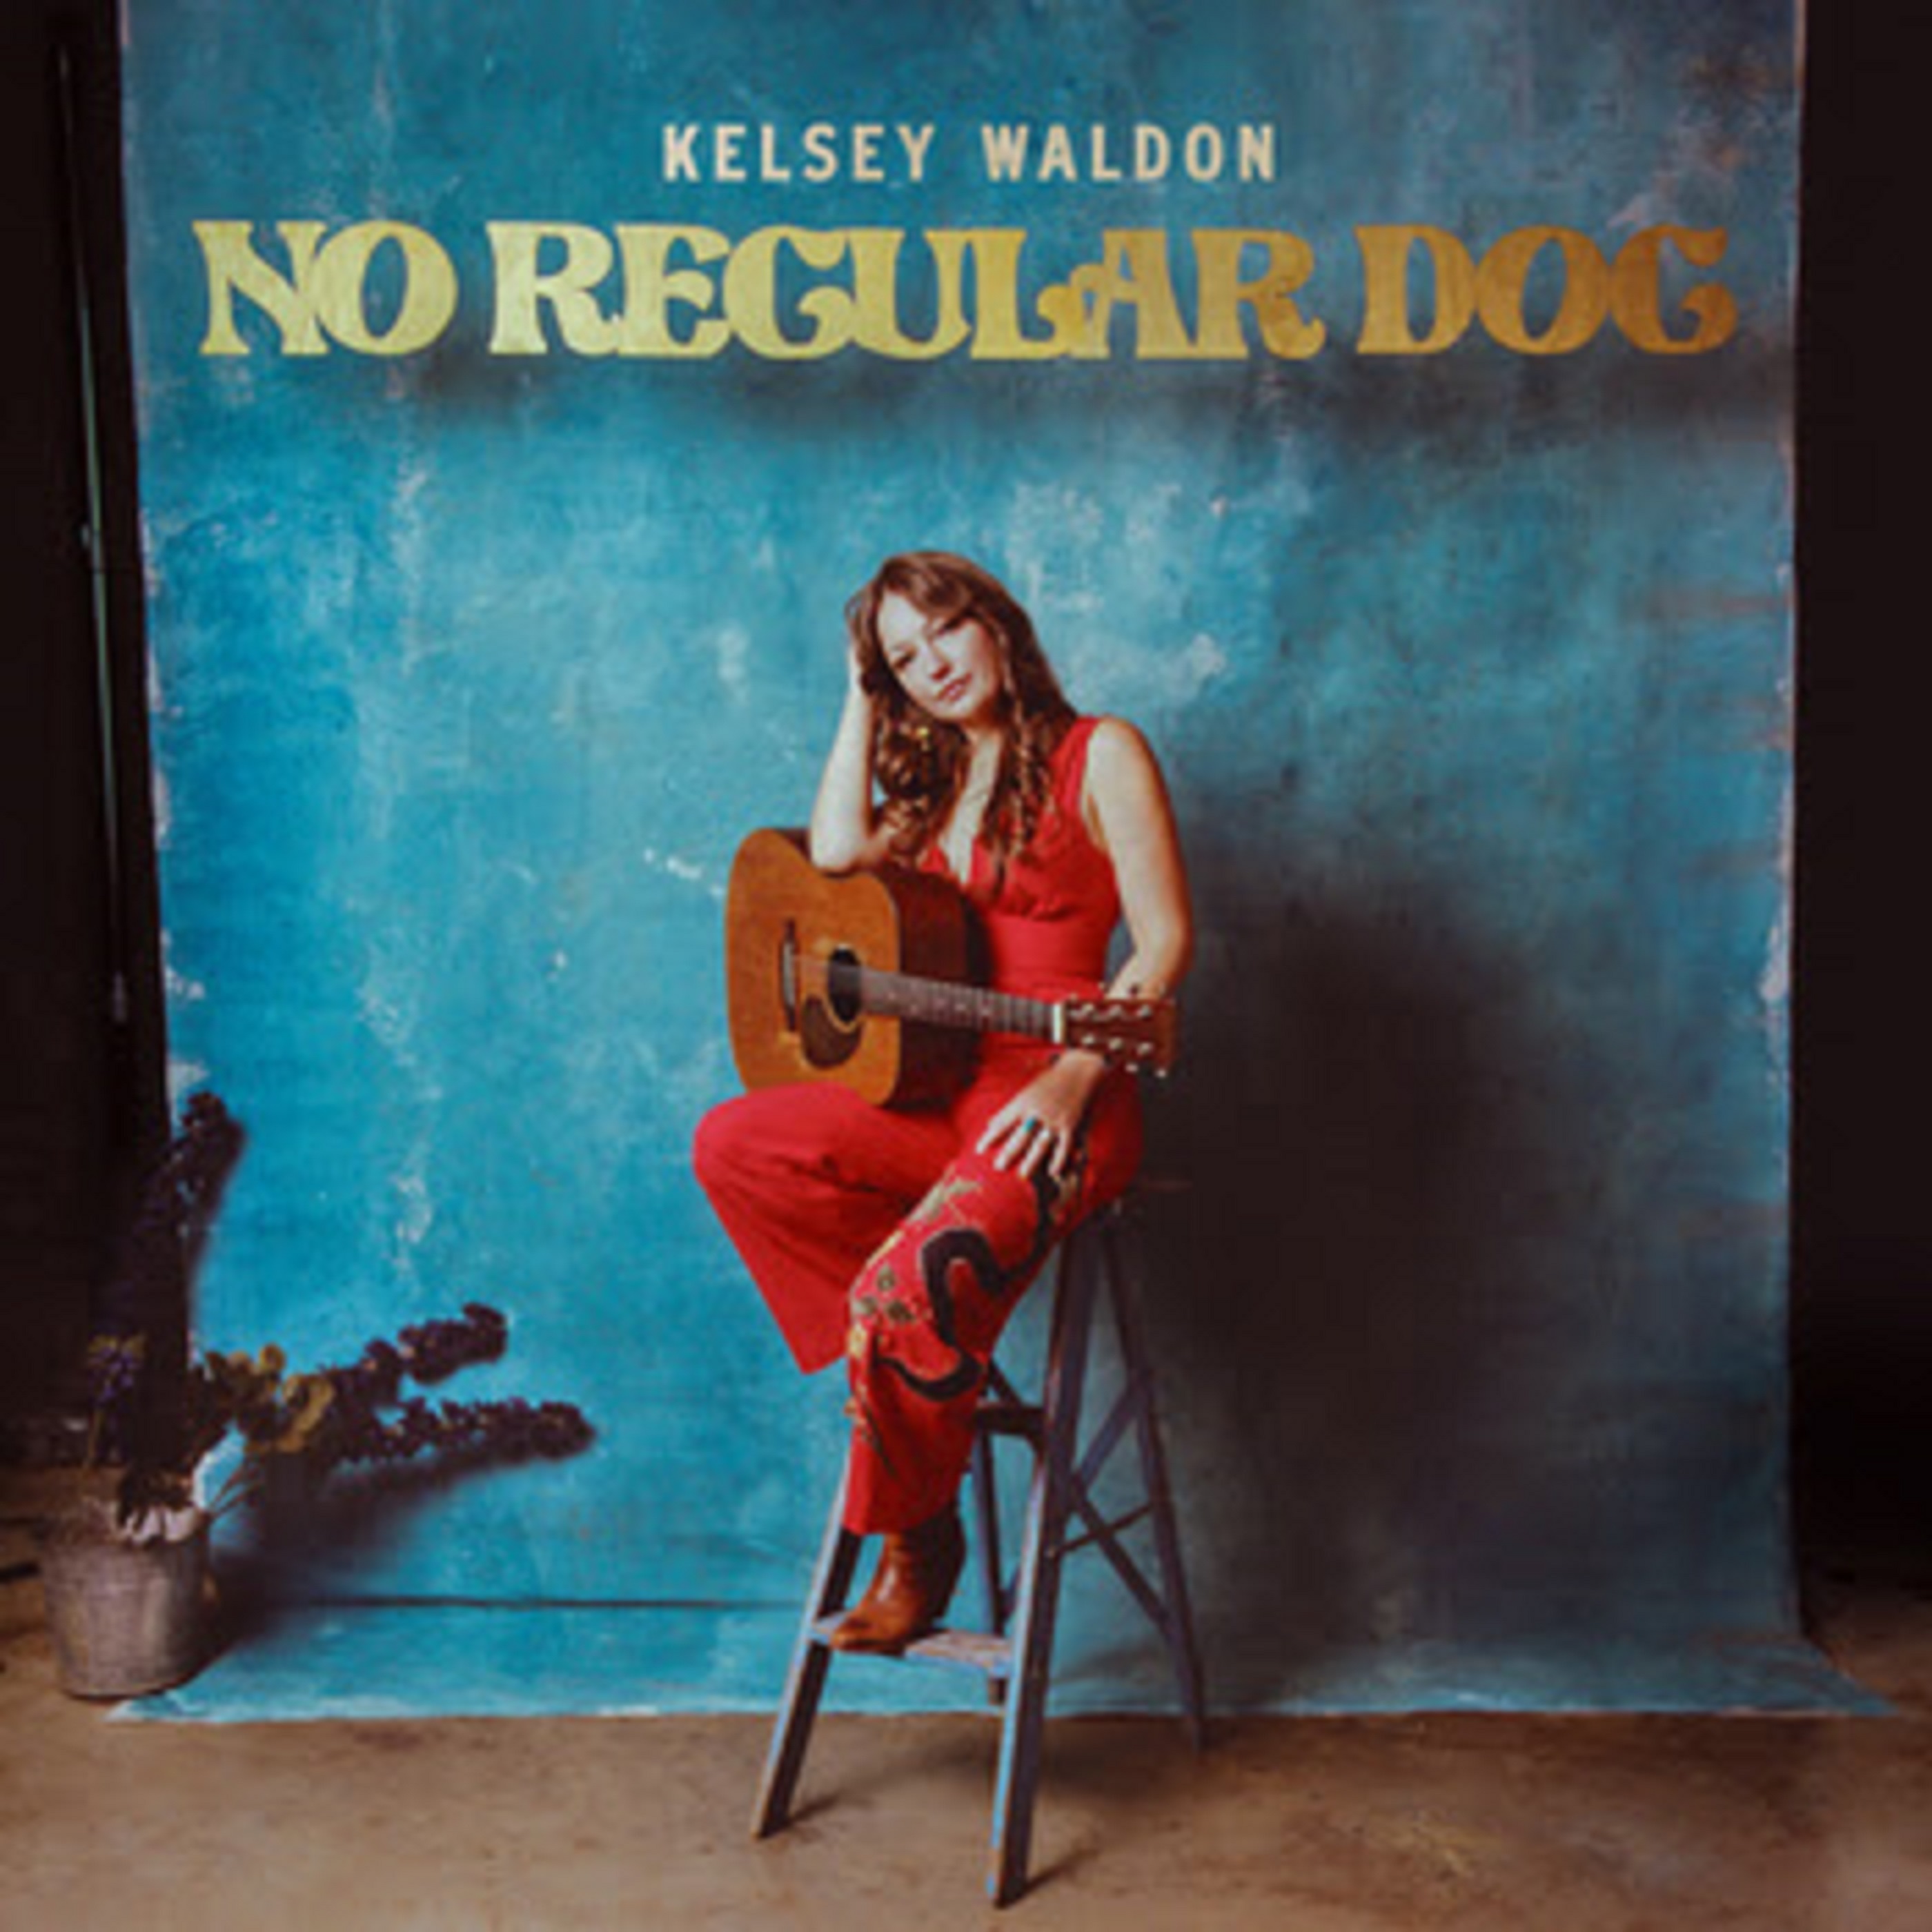 Kelsey Waldon’s new song “Tall and Mighty” debuts today; watch the official music video